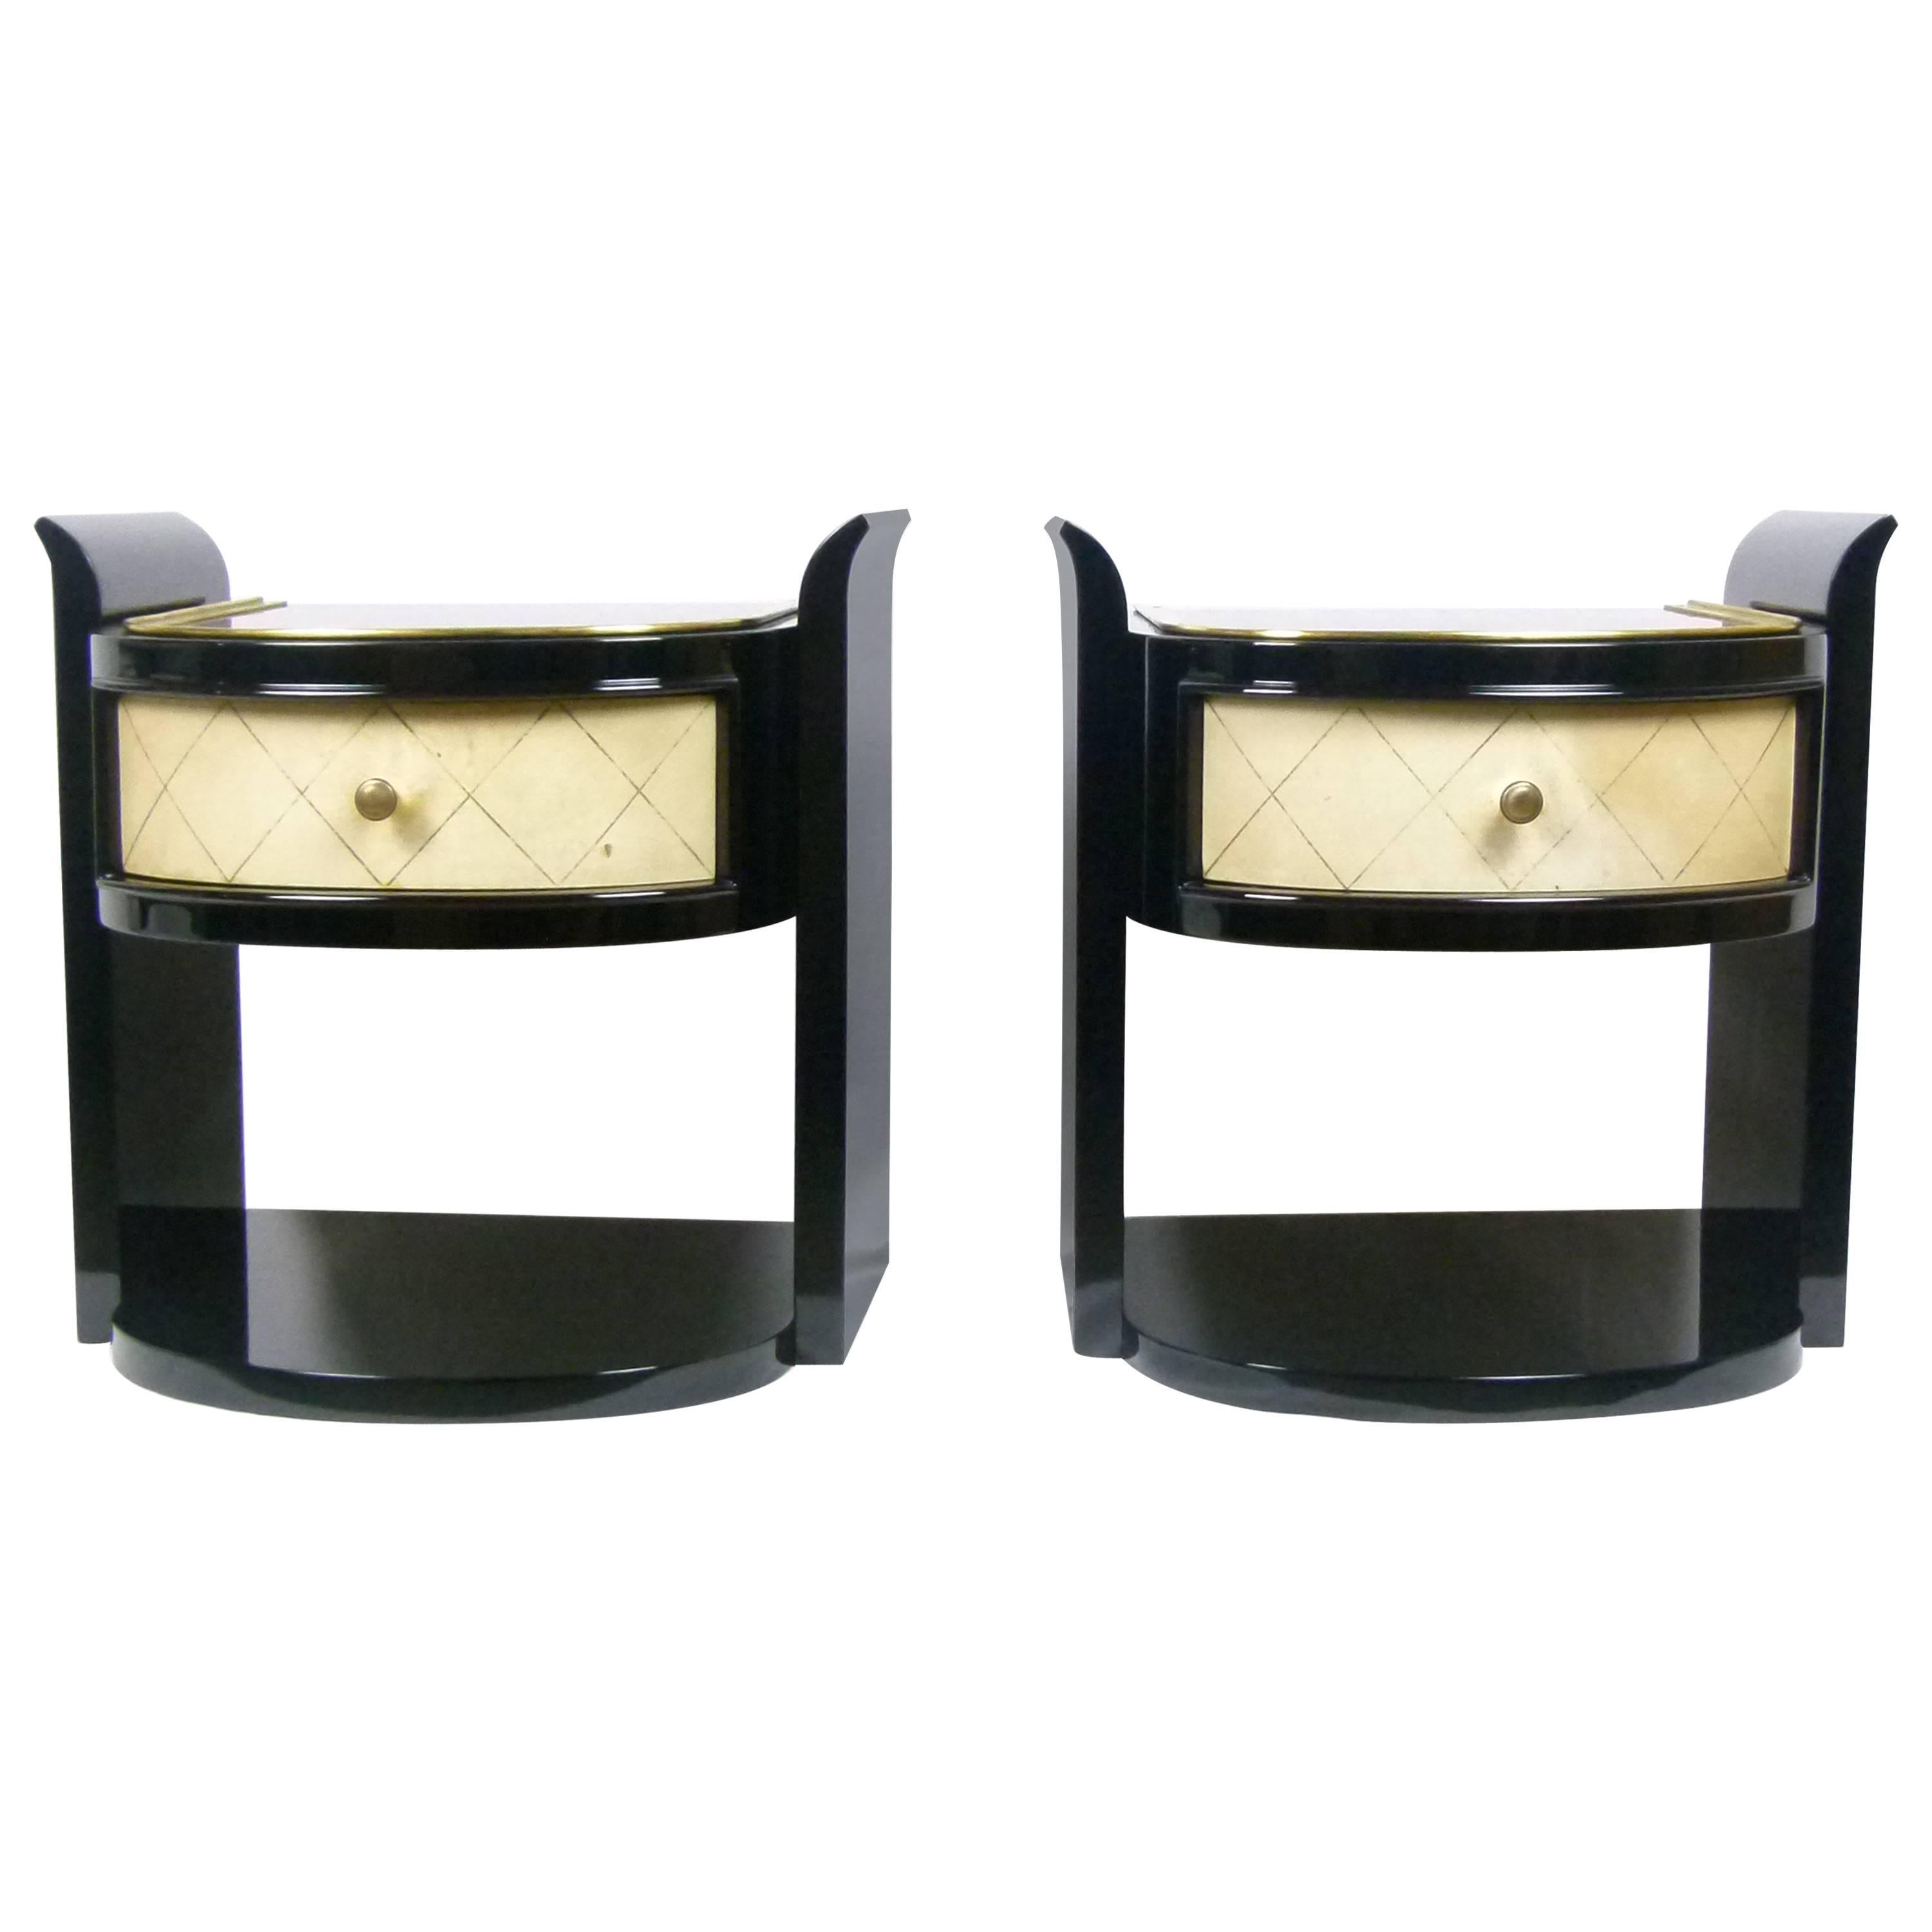 Pair of Modernist Art Deco Bedside Tables in Lacquer and Parchment